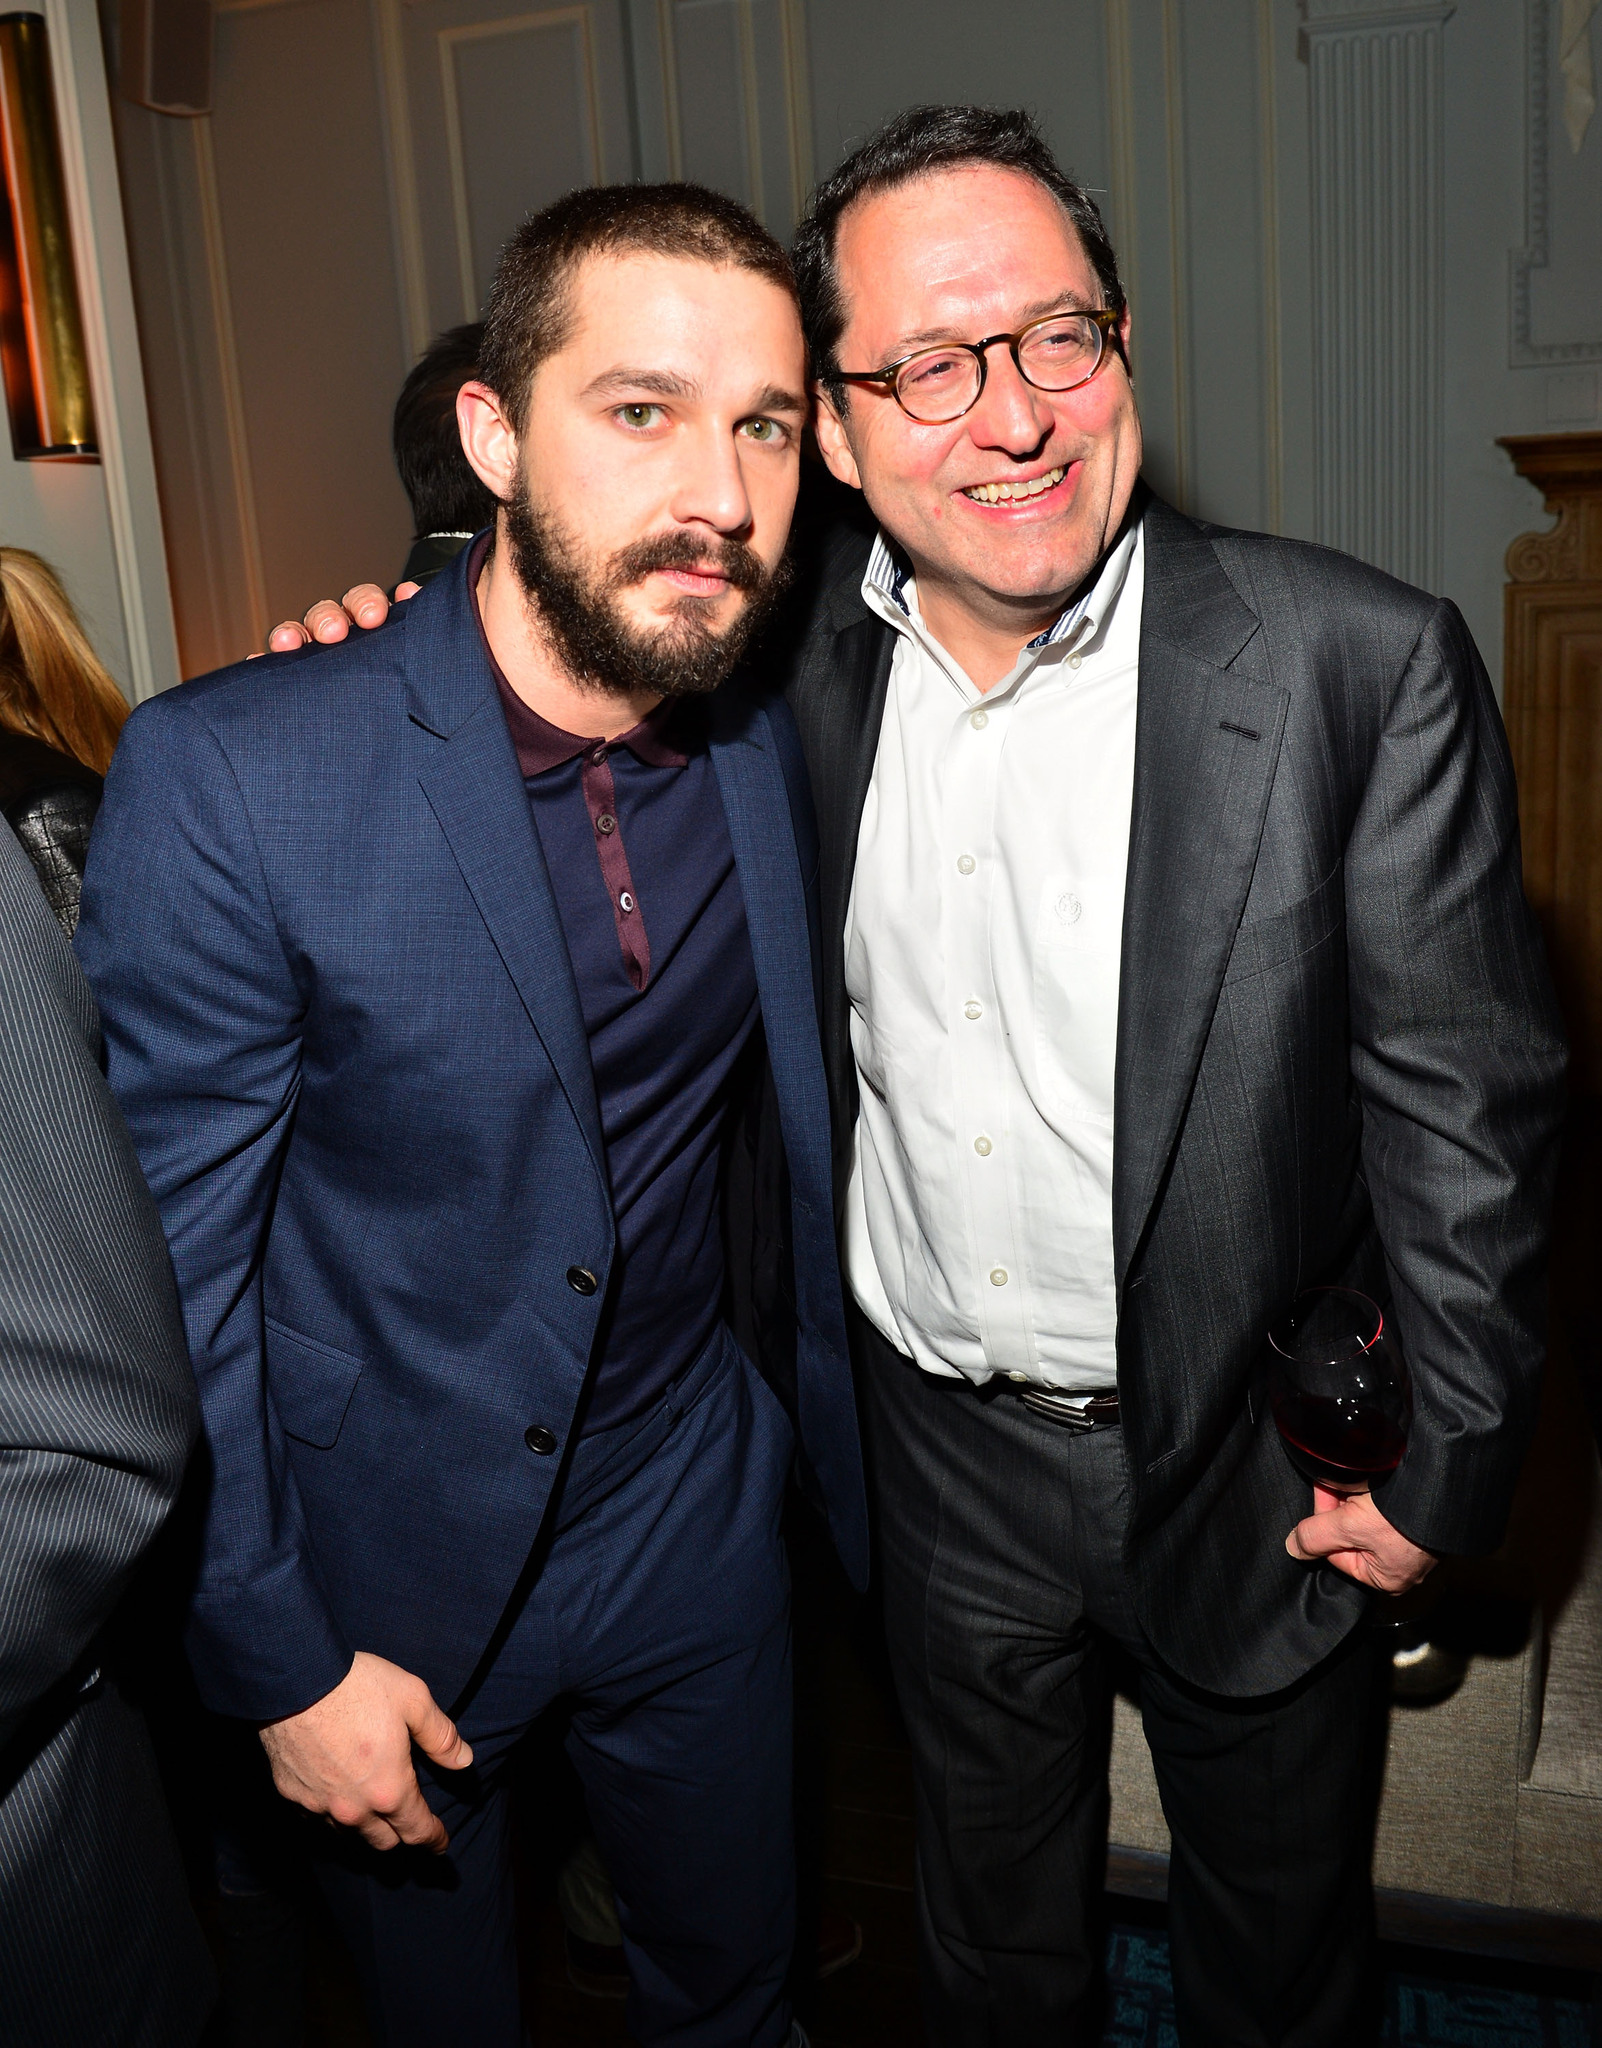 Shia LaBeouf and Michael Barker at event of The Company You Keep (2012)